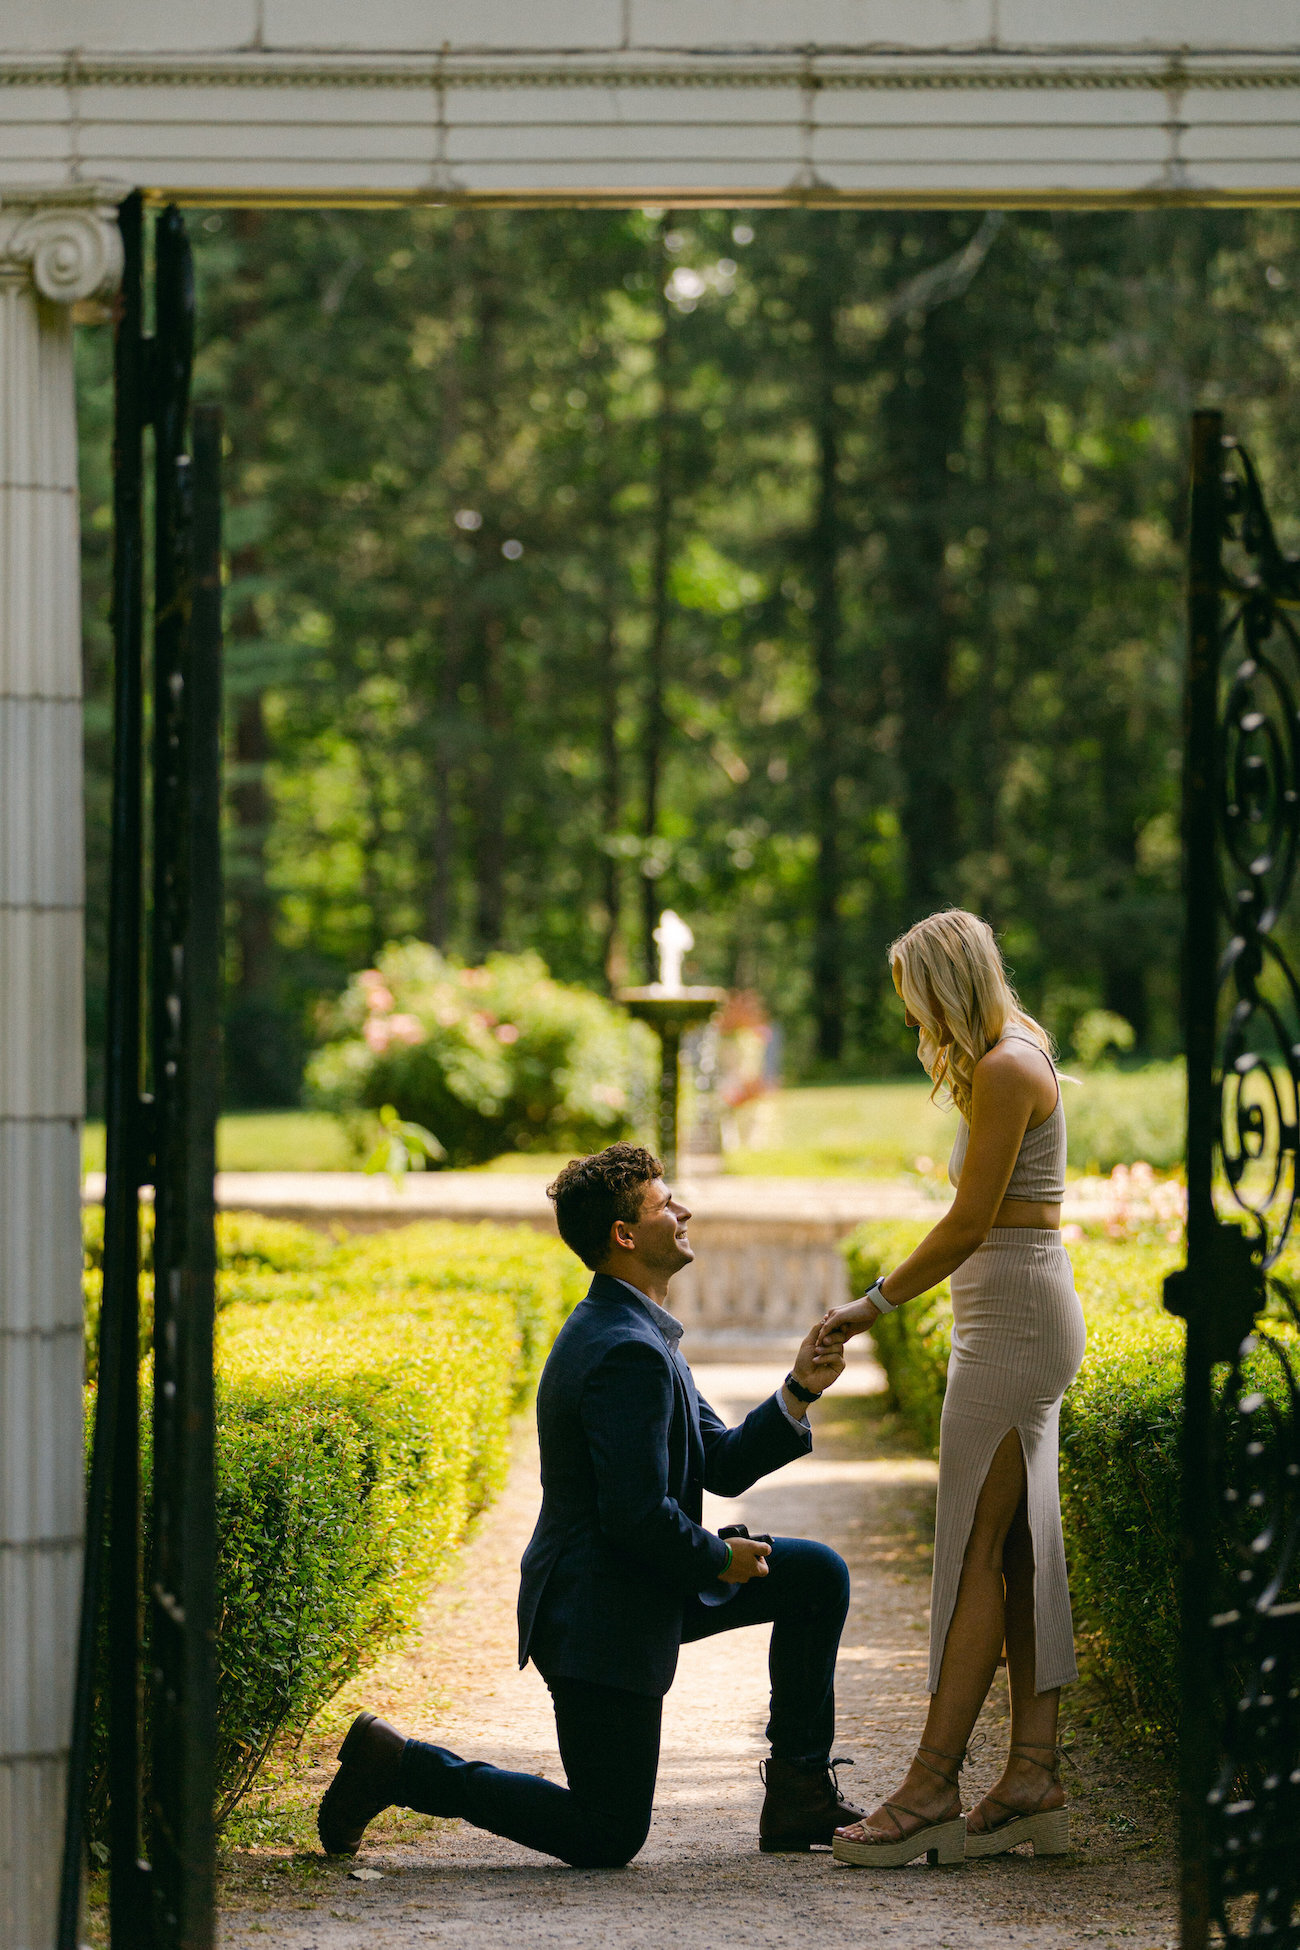 A man proposing to a woman under a tall garden entrance gate with a fountain in the background.